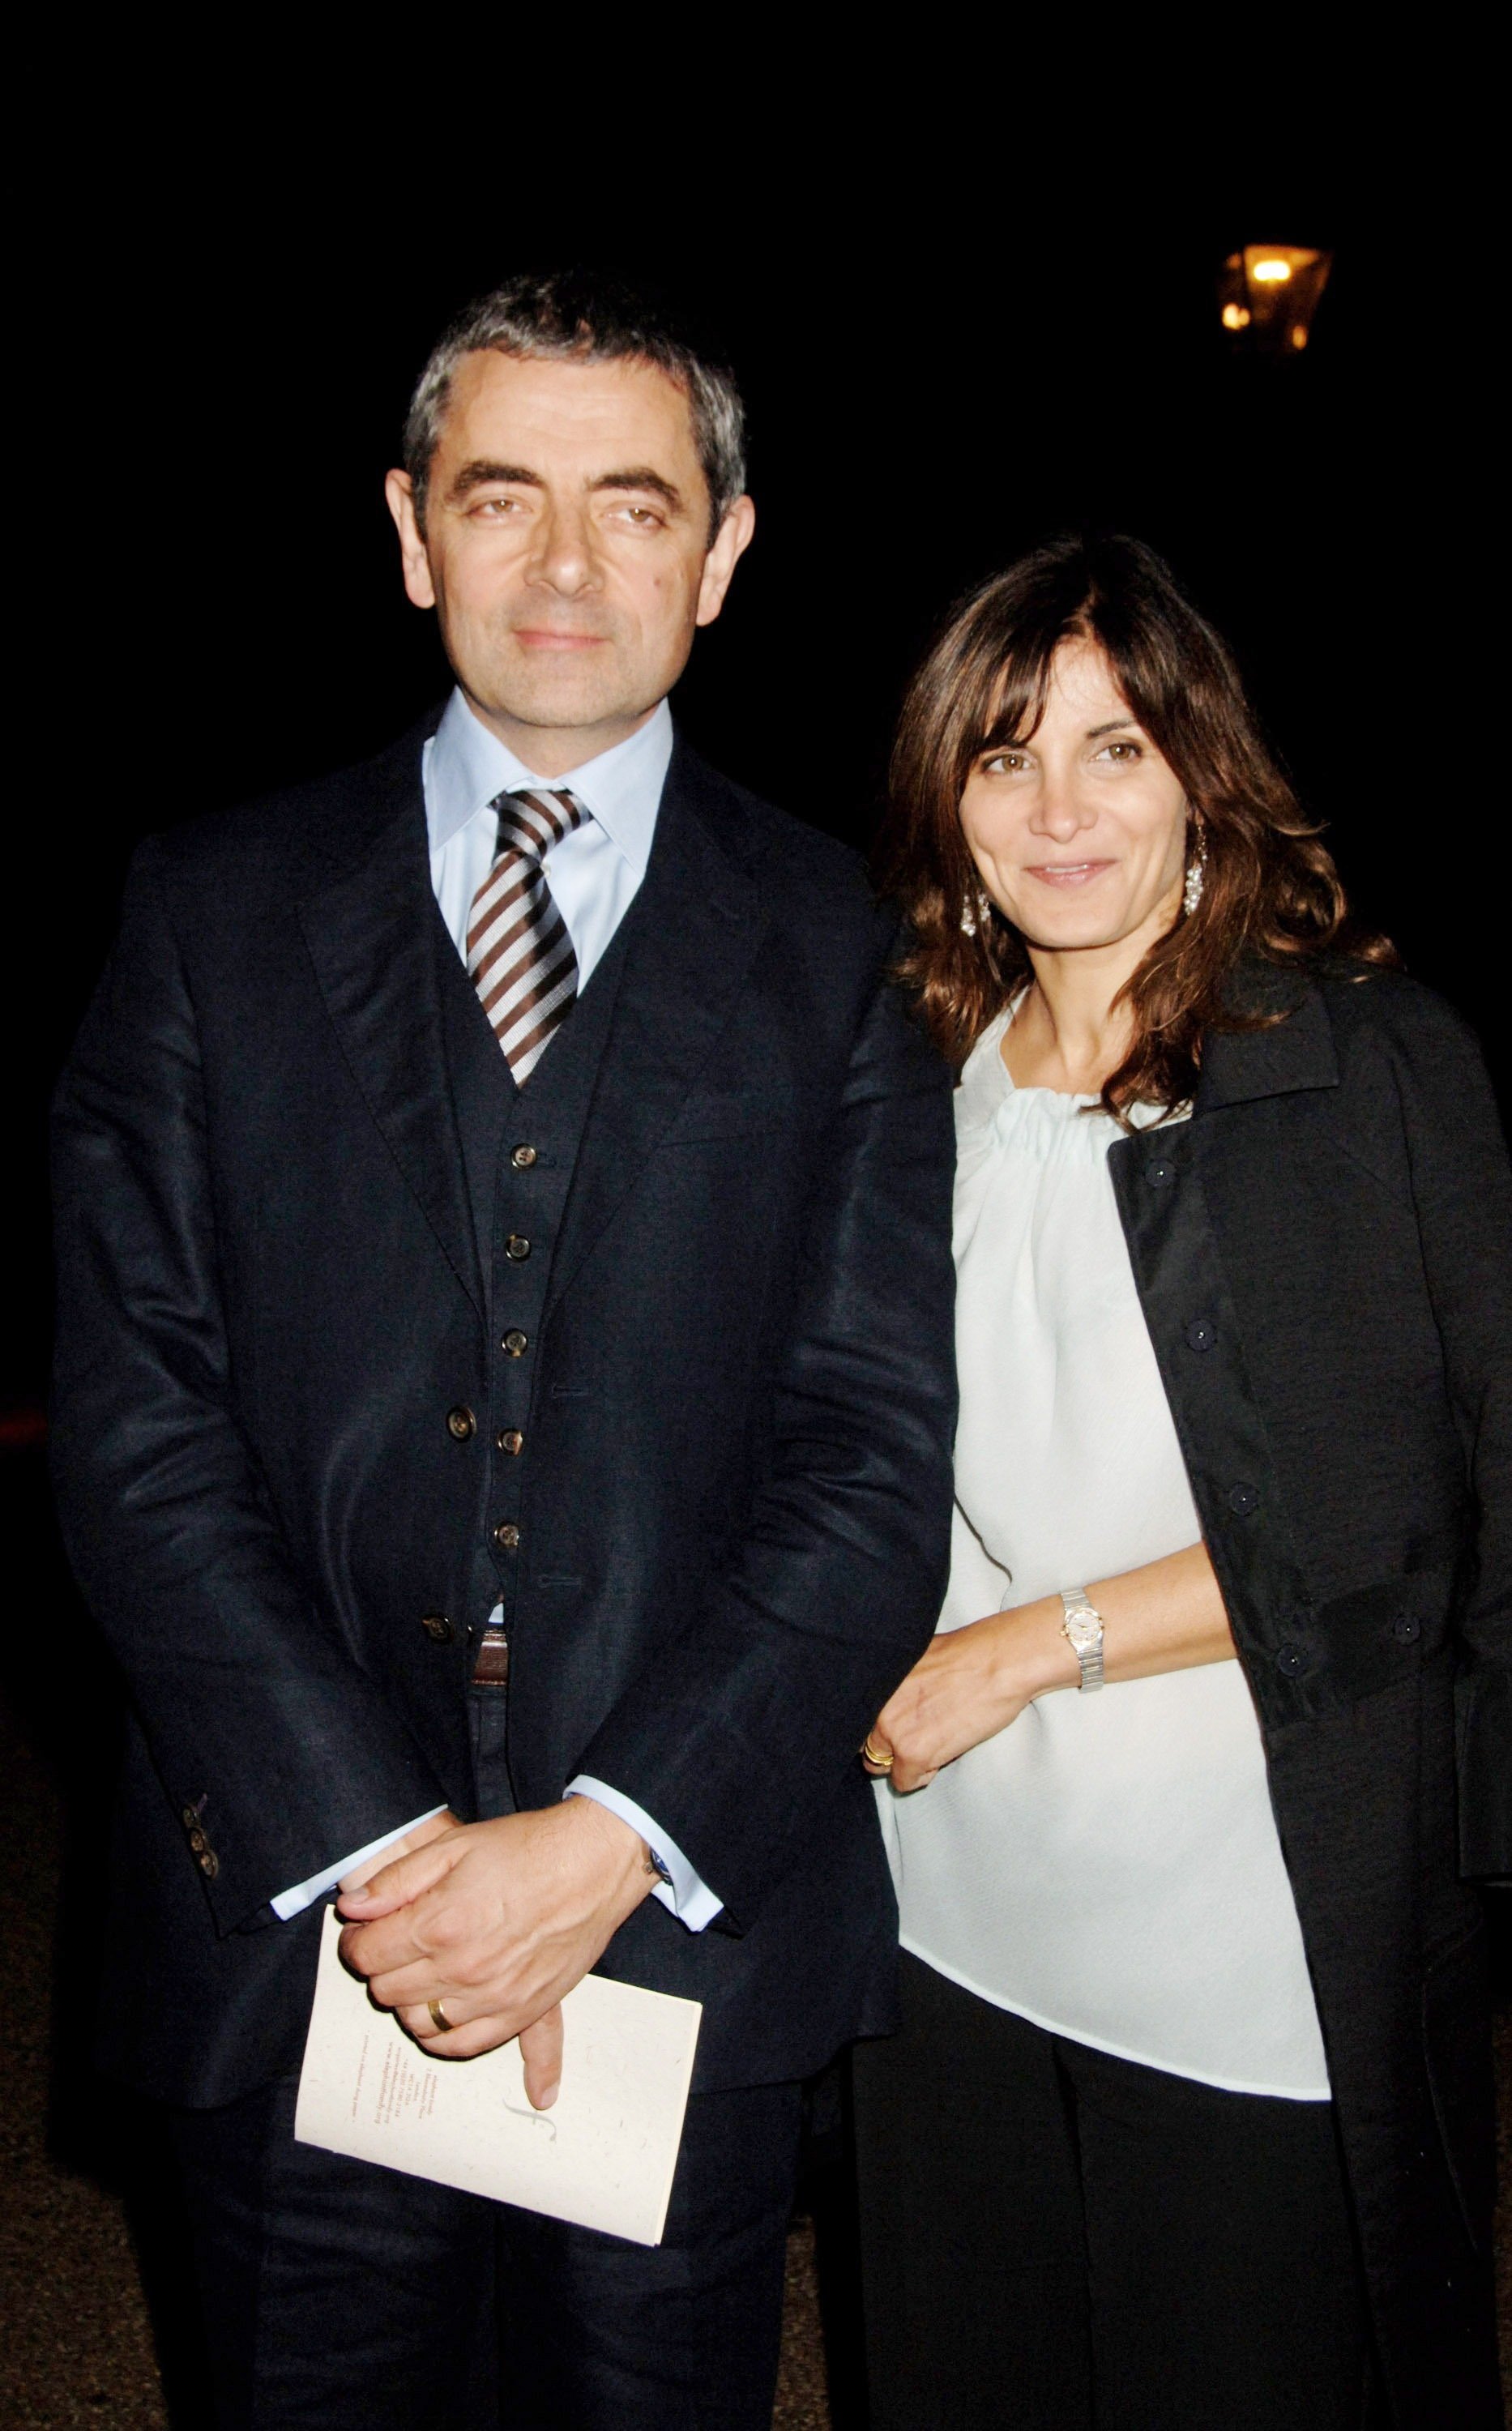  Rowan Atkinson and Sunetra Sastry attend the Quintessentially Trunk Party, at The Serpentine Lido on September 16, 2007, in London, England. | Source: Getty Images